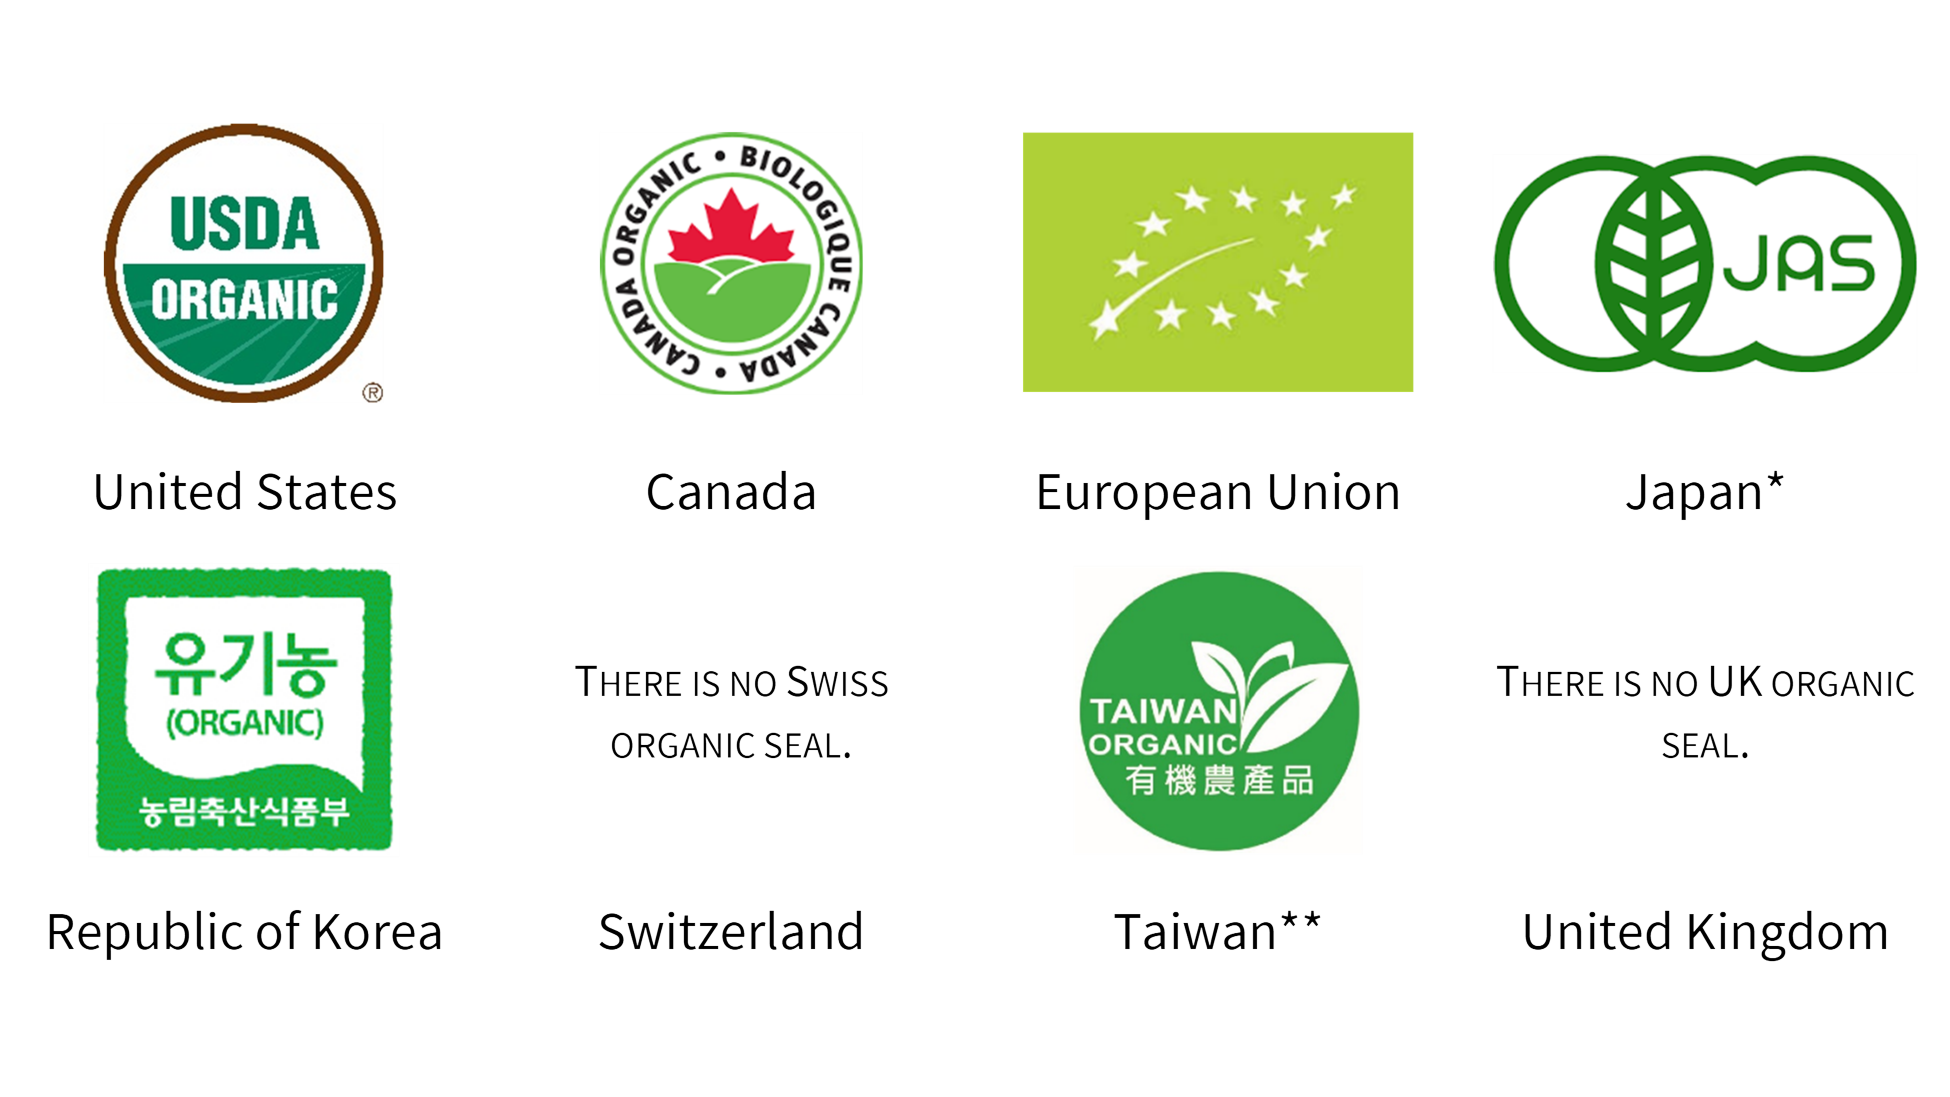 Organic Logos from USA, Canada, EU and Japan and in the second row: Korea and Tawain.  There are no logos for Switzerland and the UK